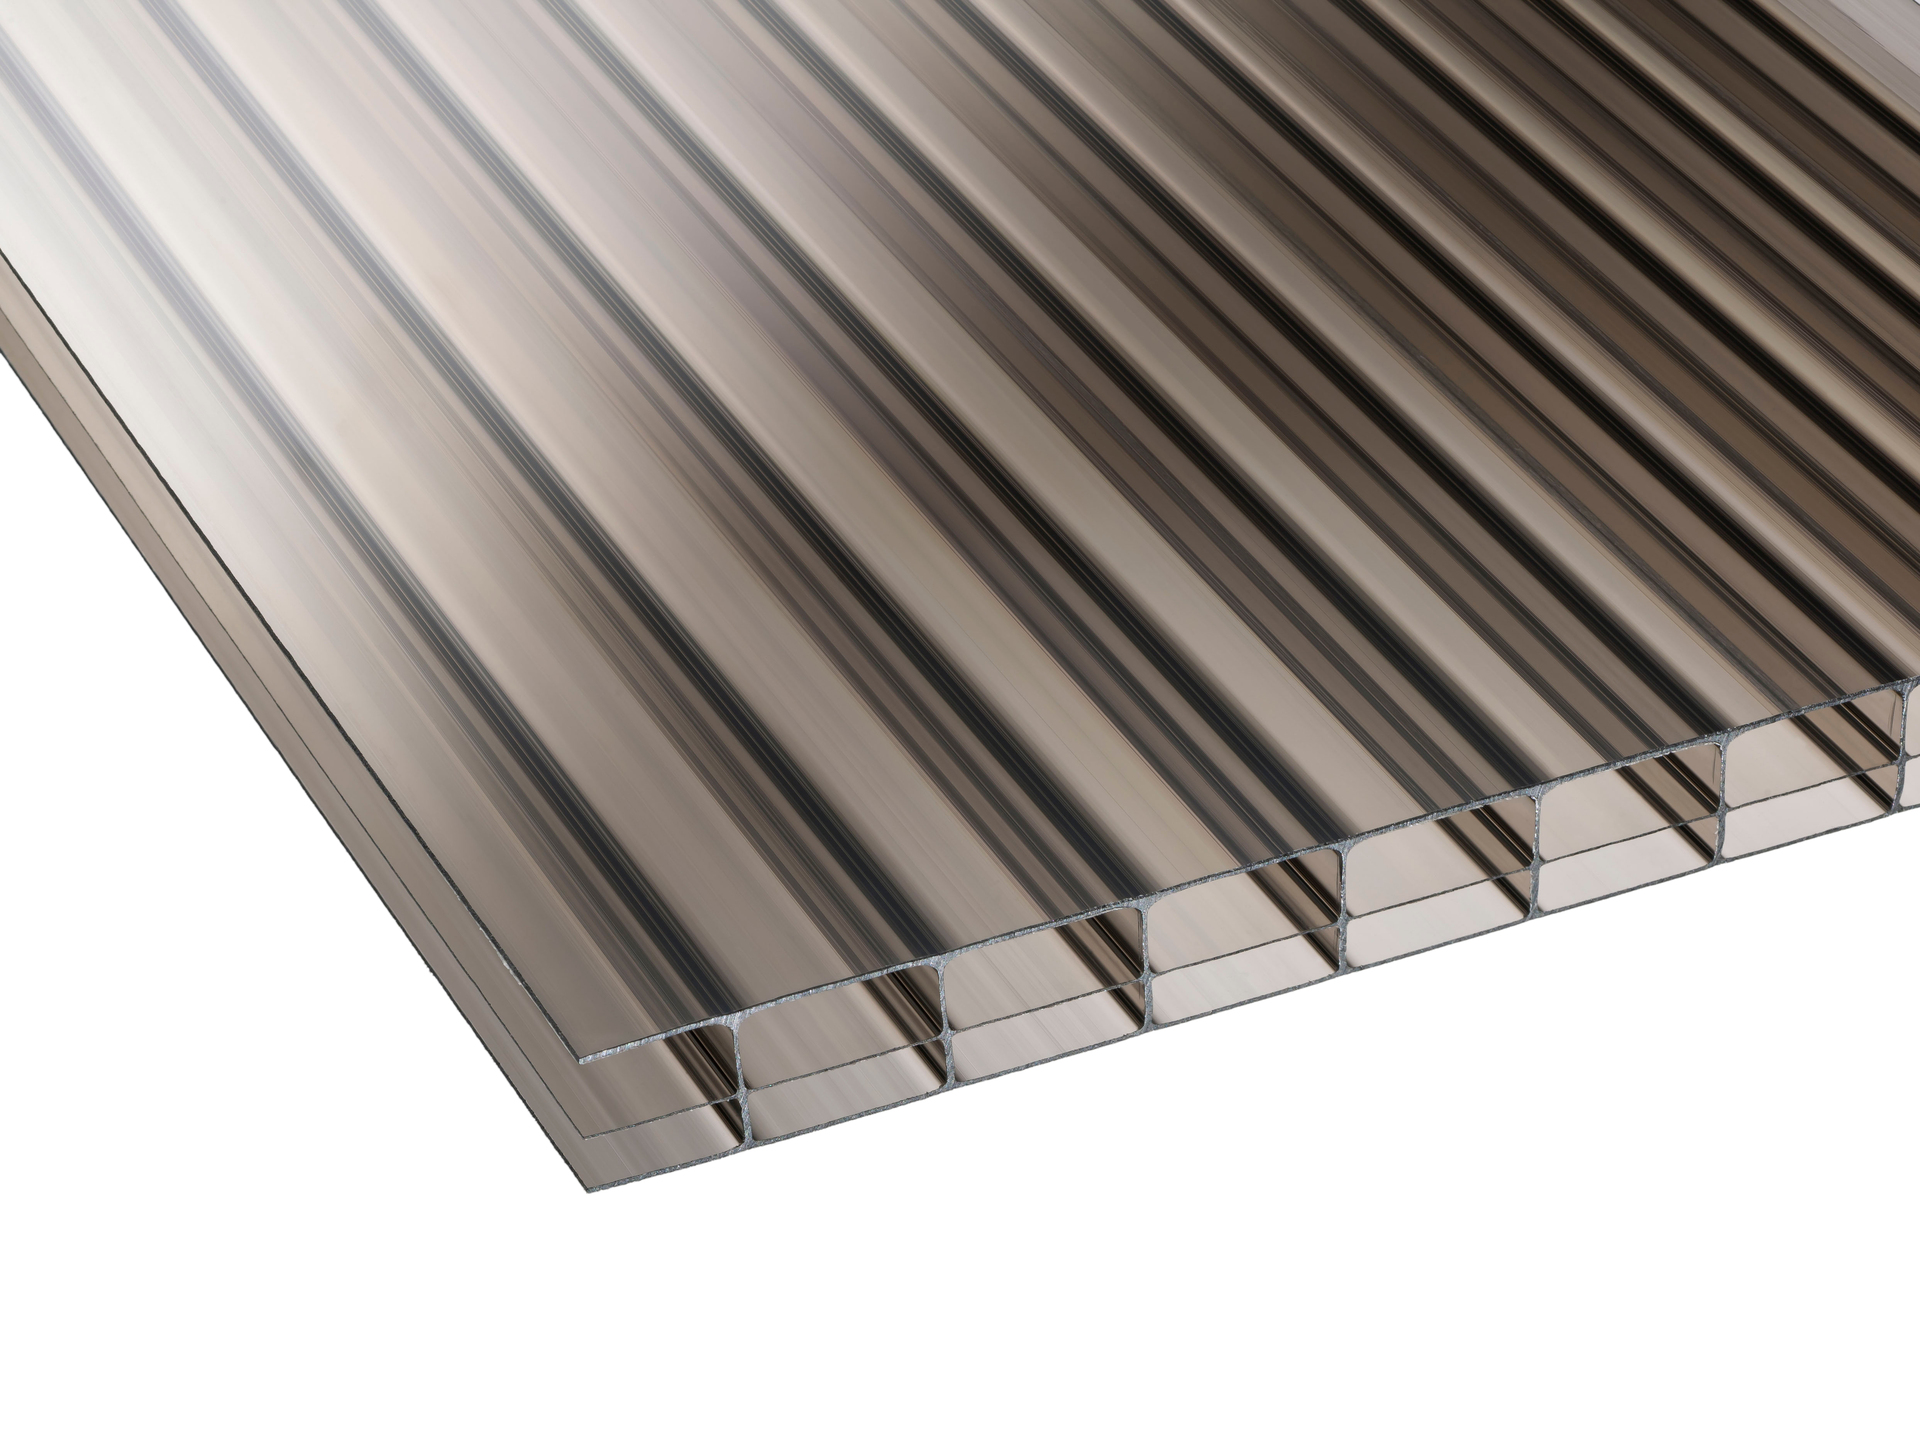 Image of 16mm Bronze Multiwall Polycarbonate Sheet - 2500 x 700mm